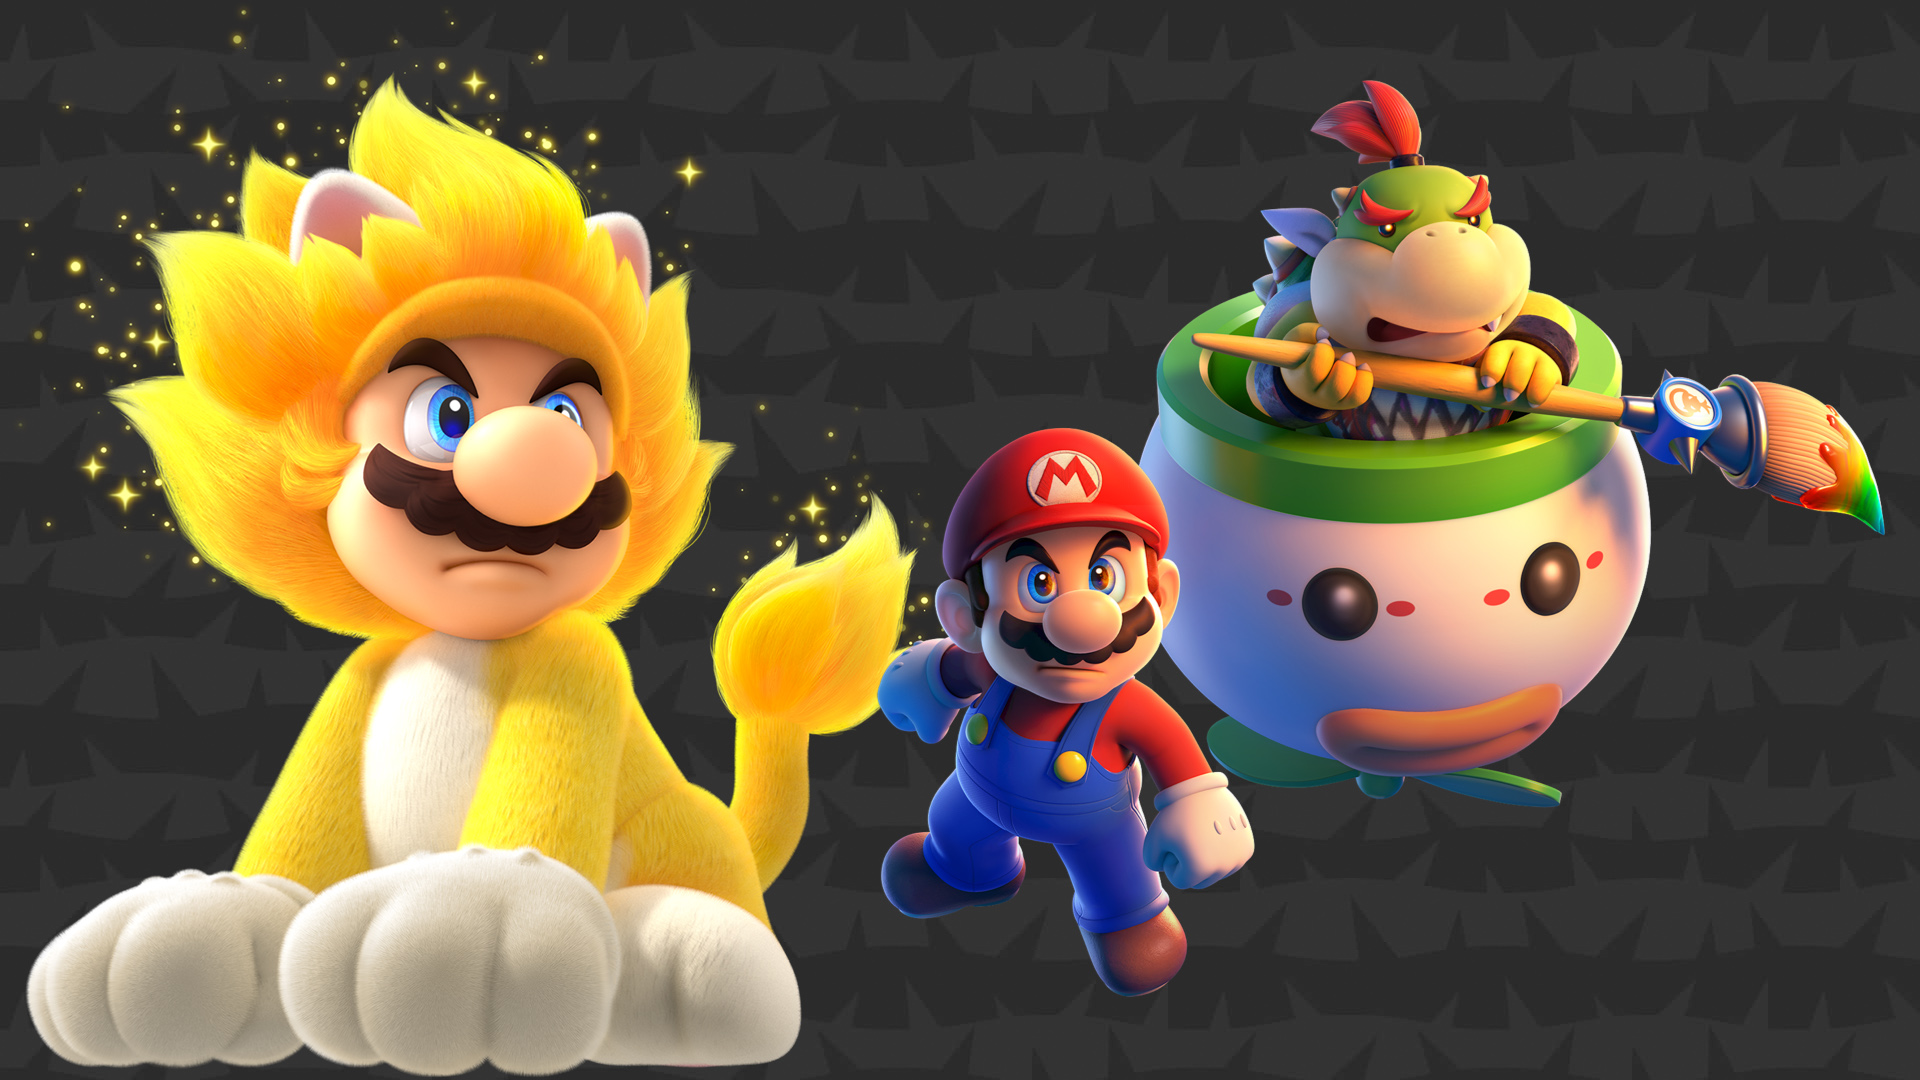 Super Mario 3D World + Bowser’s Fury Overview Trailer gives us more specifi...